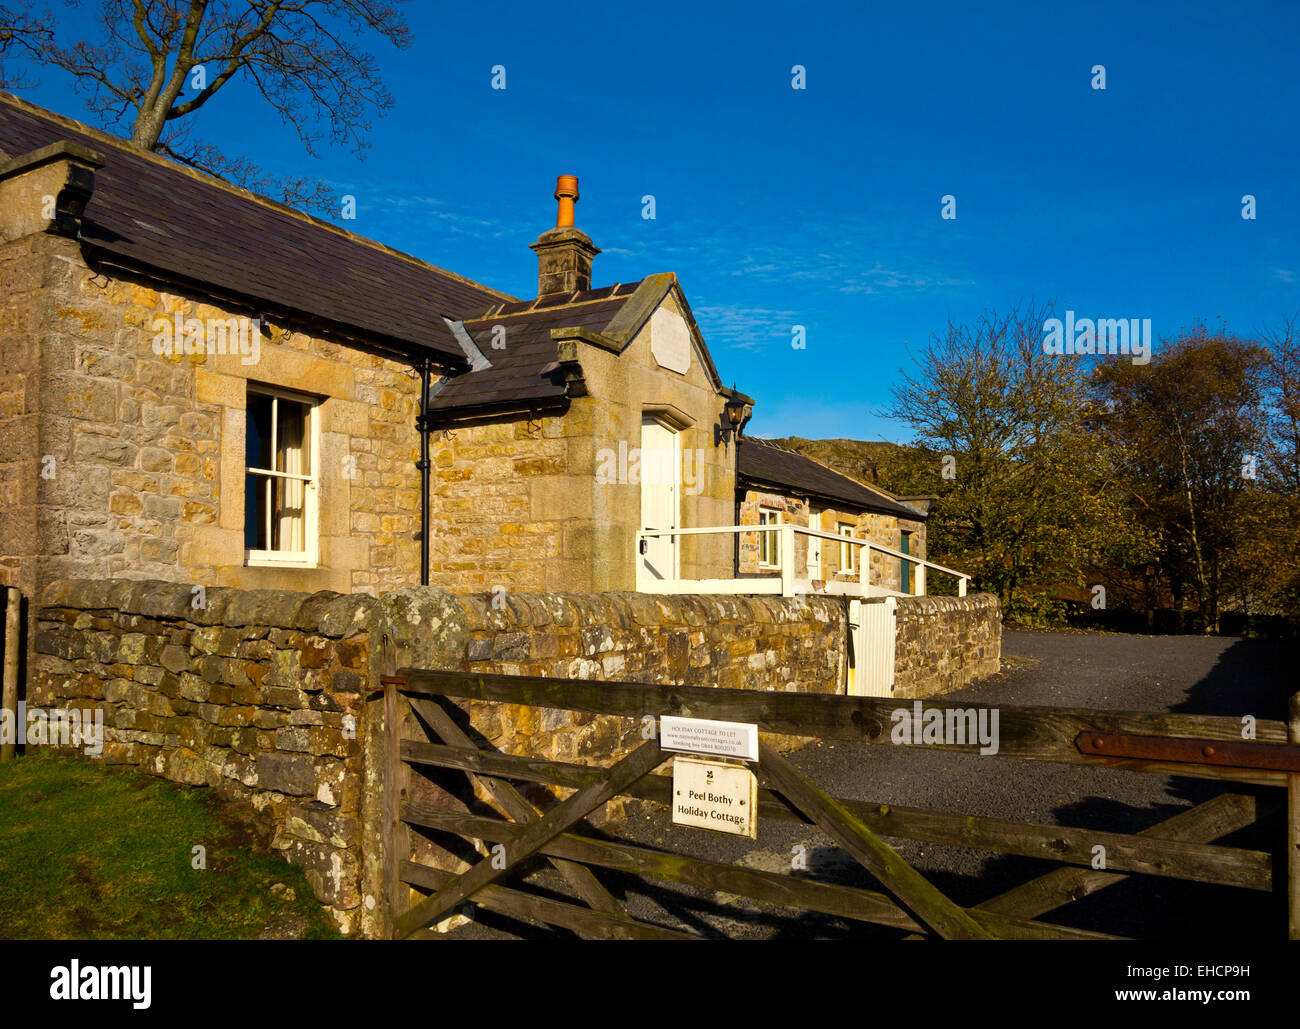 Peel Bothy a National Trust holiday cottage built in 1850s near Hadrian's Wall Steel Rigg Northumberland north east England UK Stock Photo